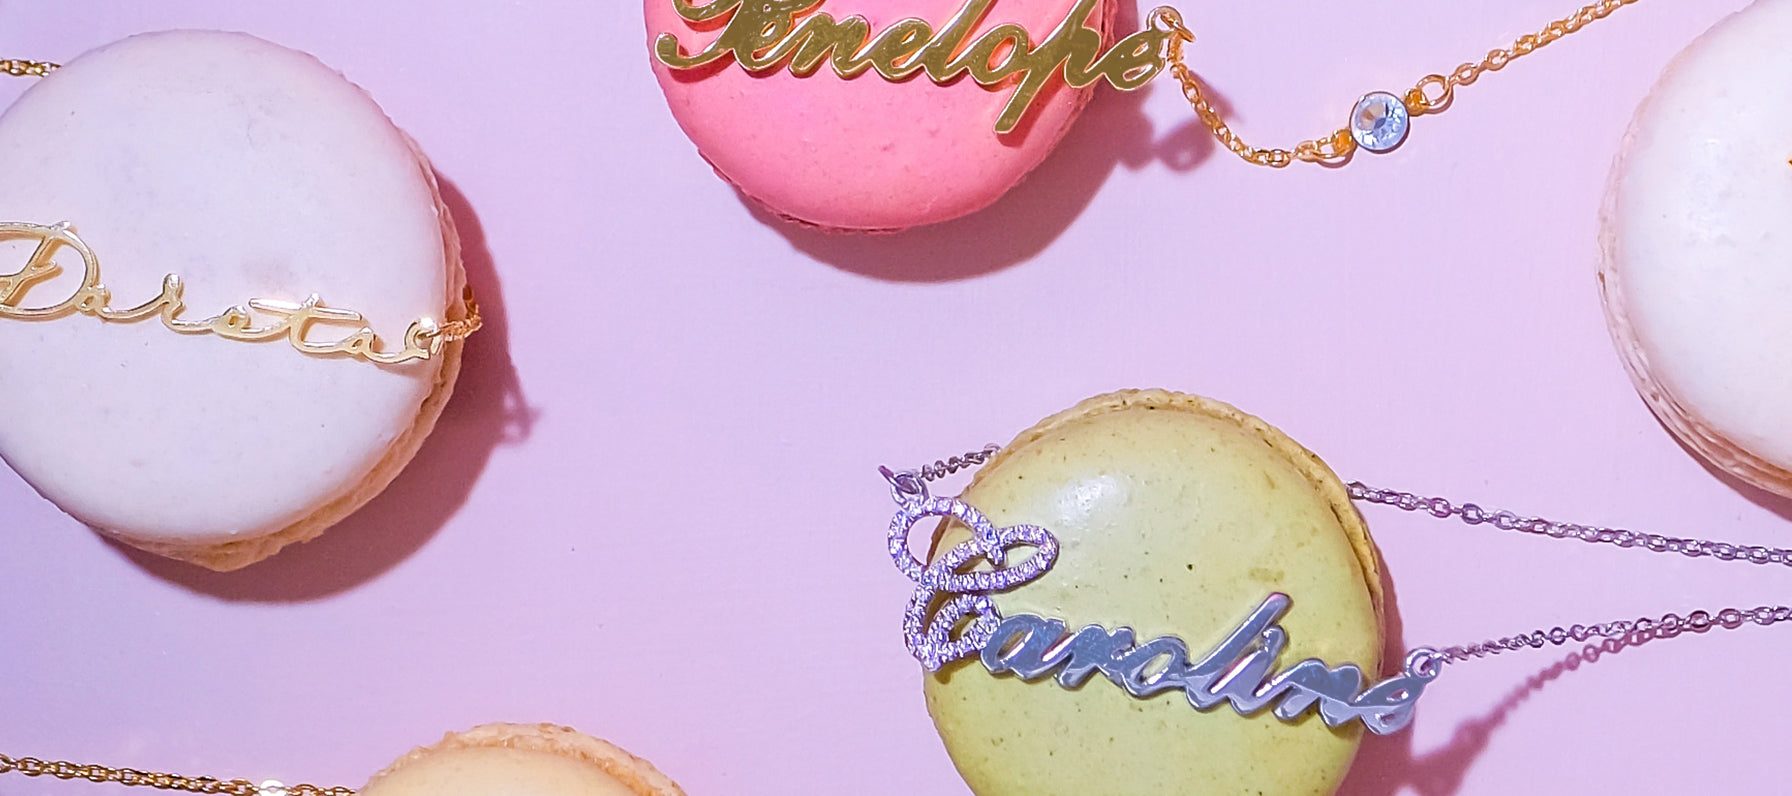 Personalise Your Look with Gorgeous Name Necklaces